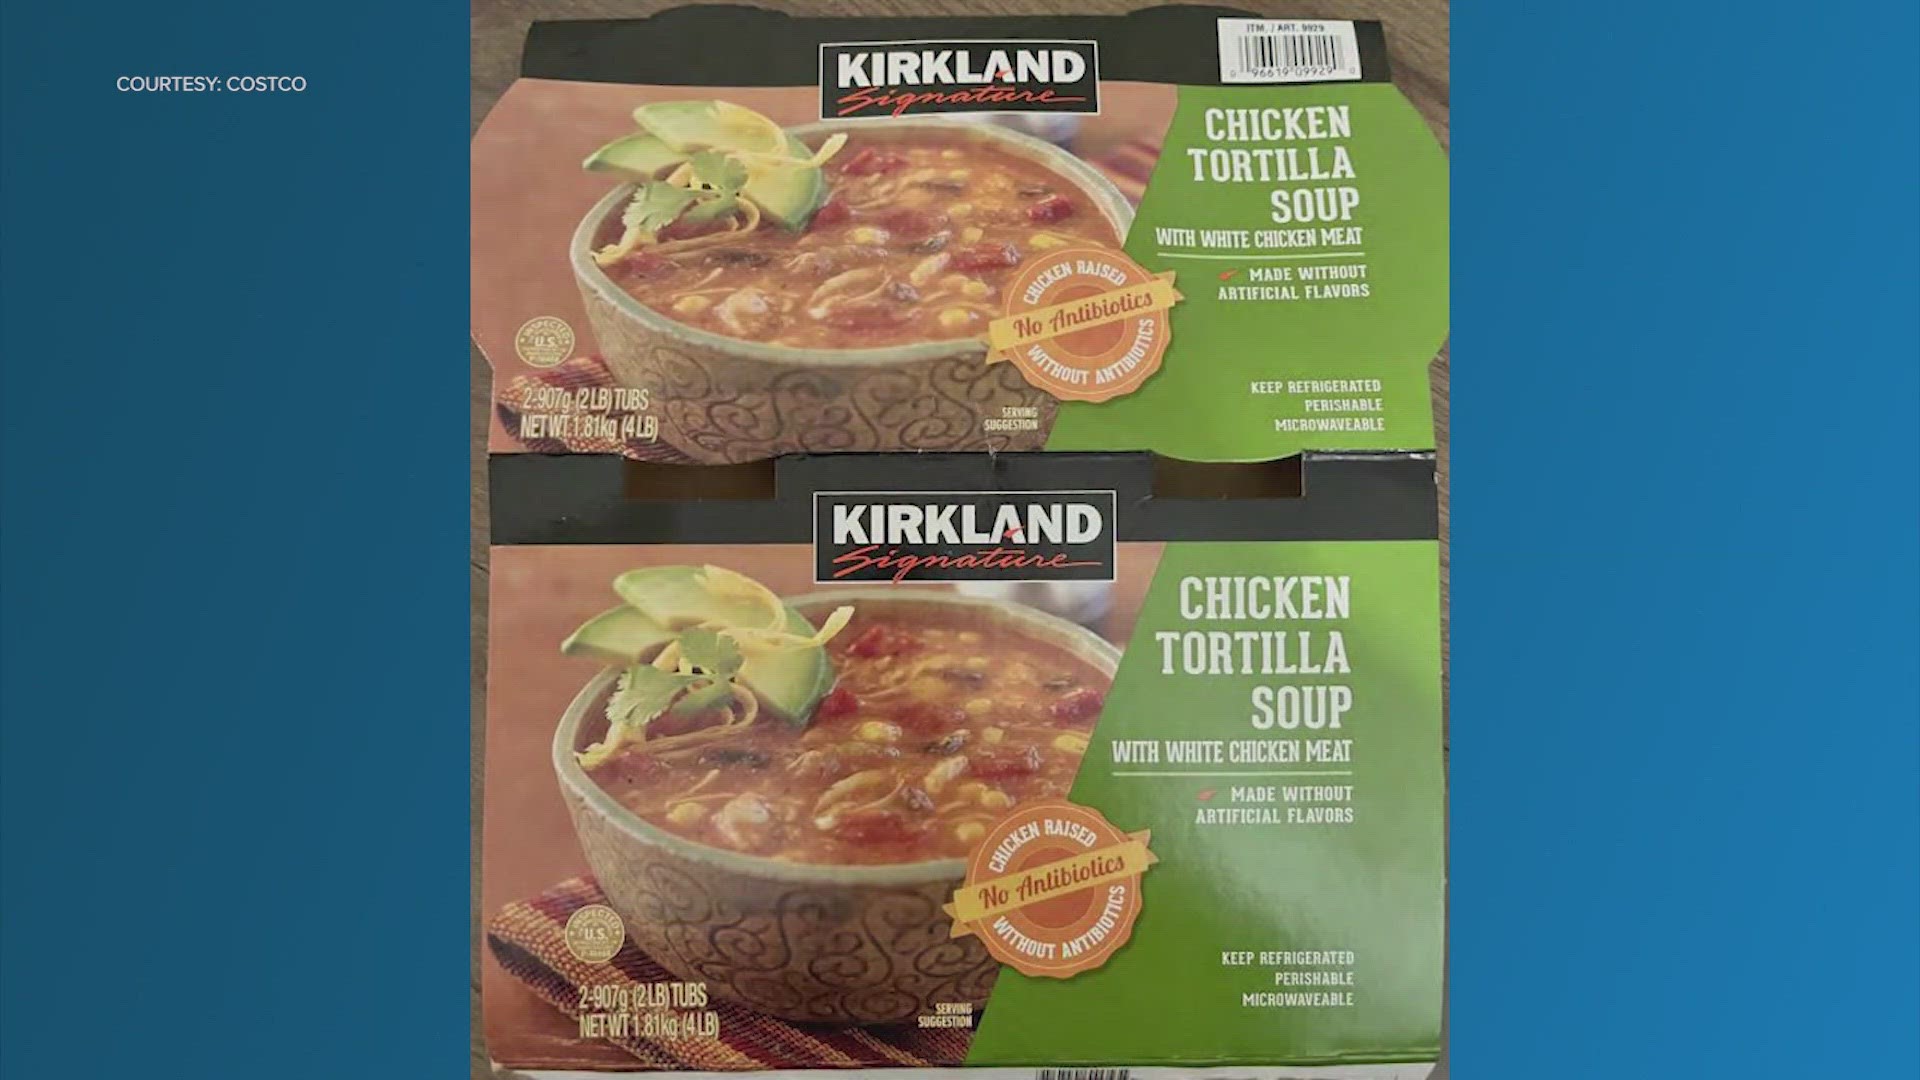 Costco said people with a gluten intolerance or sensitivity should not consume the soup and instead return it for a full refund or throw it away.